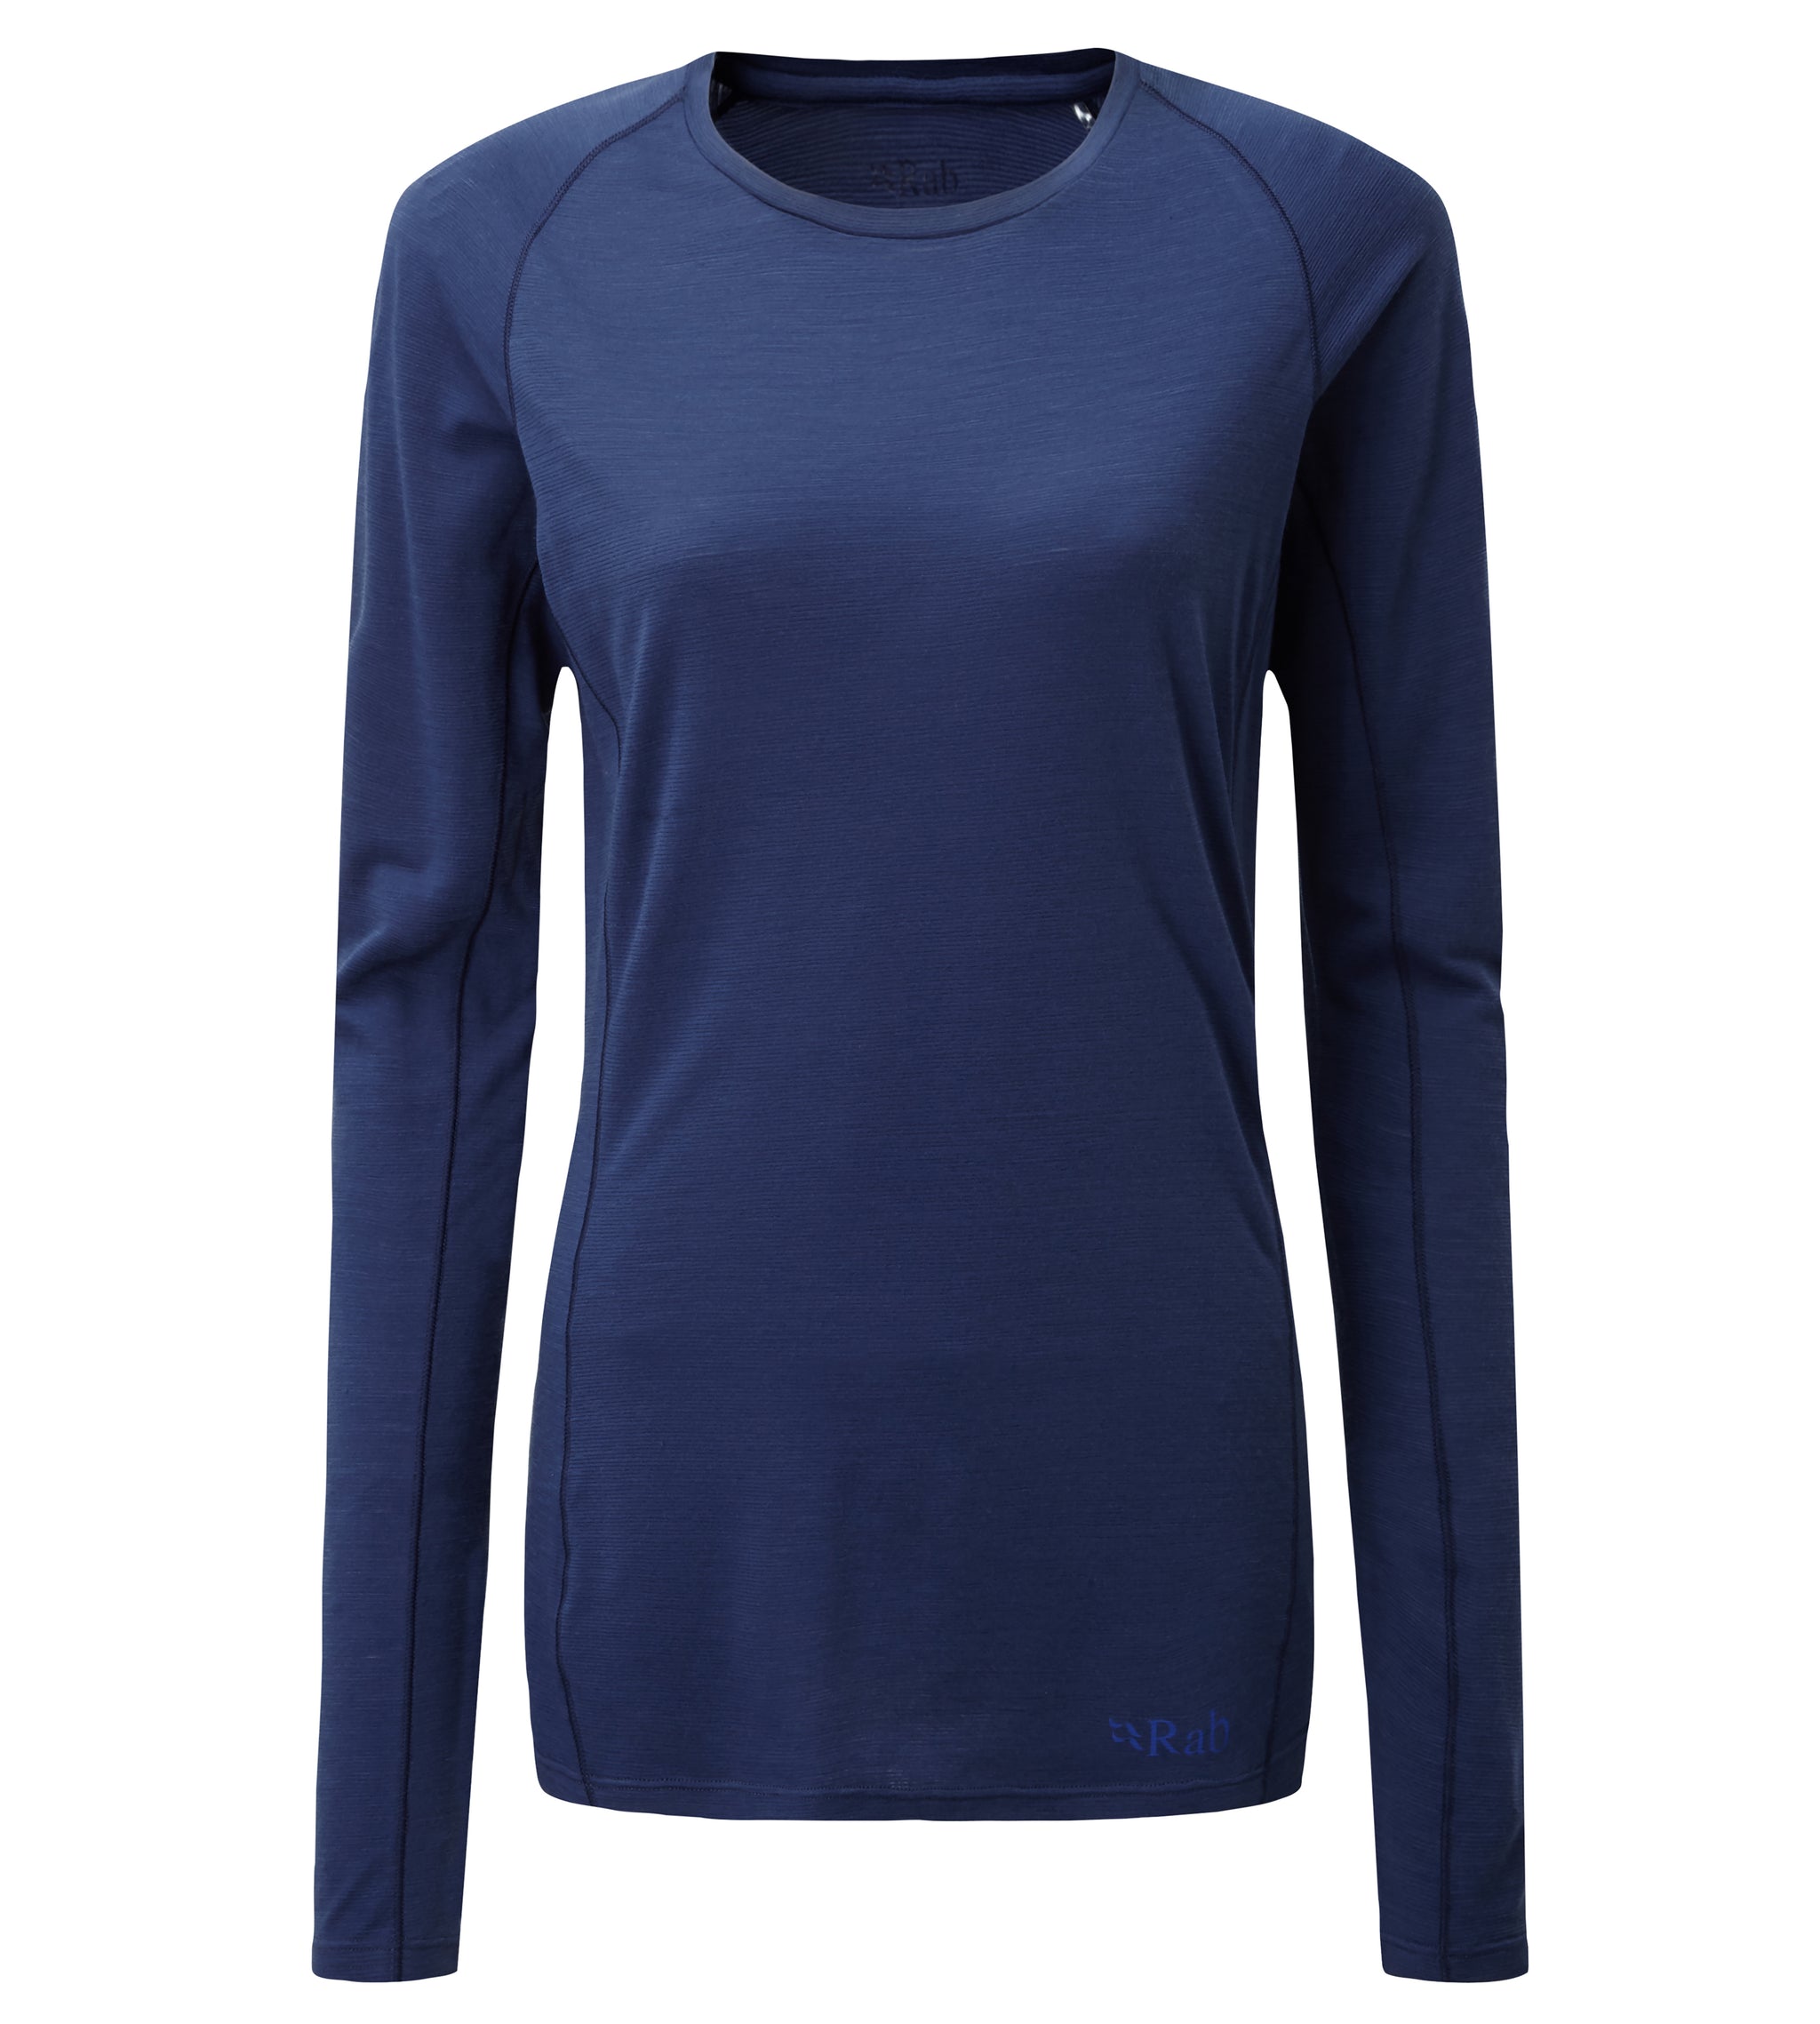 Rab Women's Forge Long Sleeve Tee - Outfitters Store